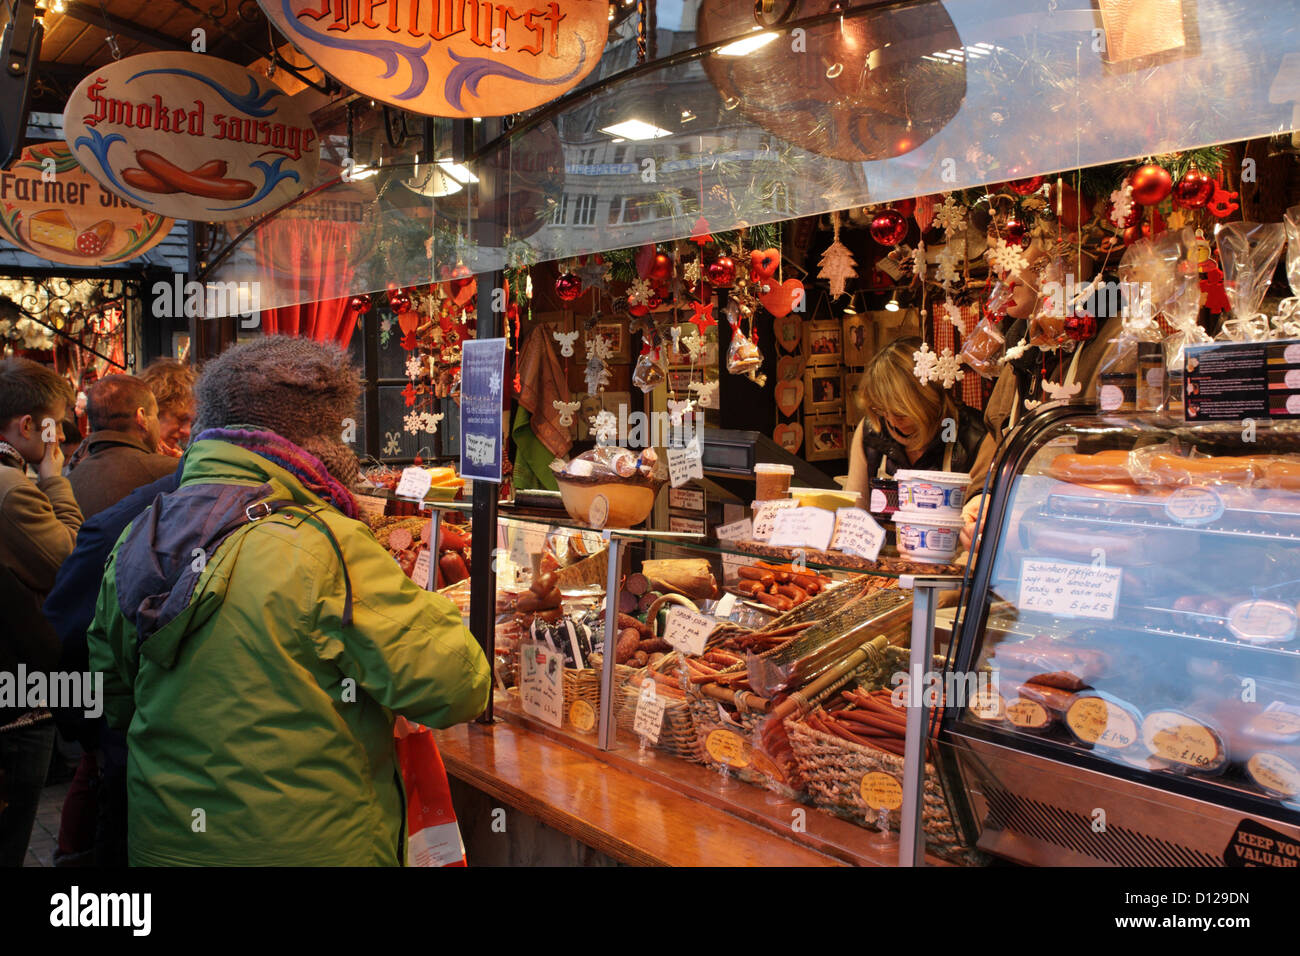 People buying food at a market stall at the Birmingham Christmas Market UK Stock Photo